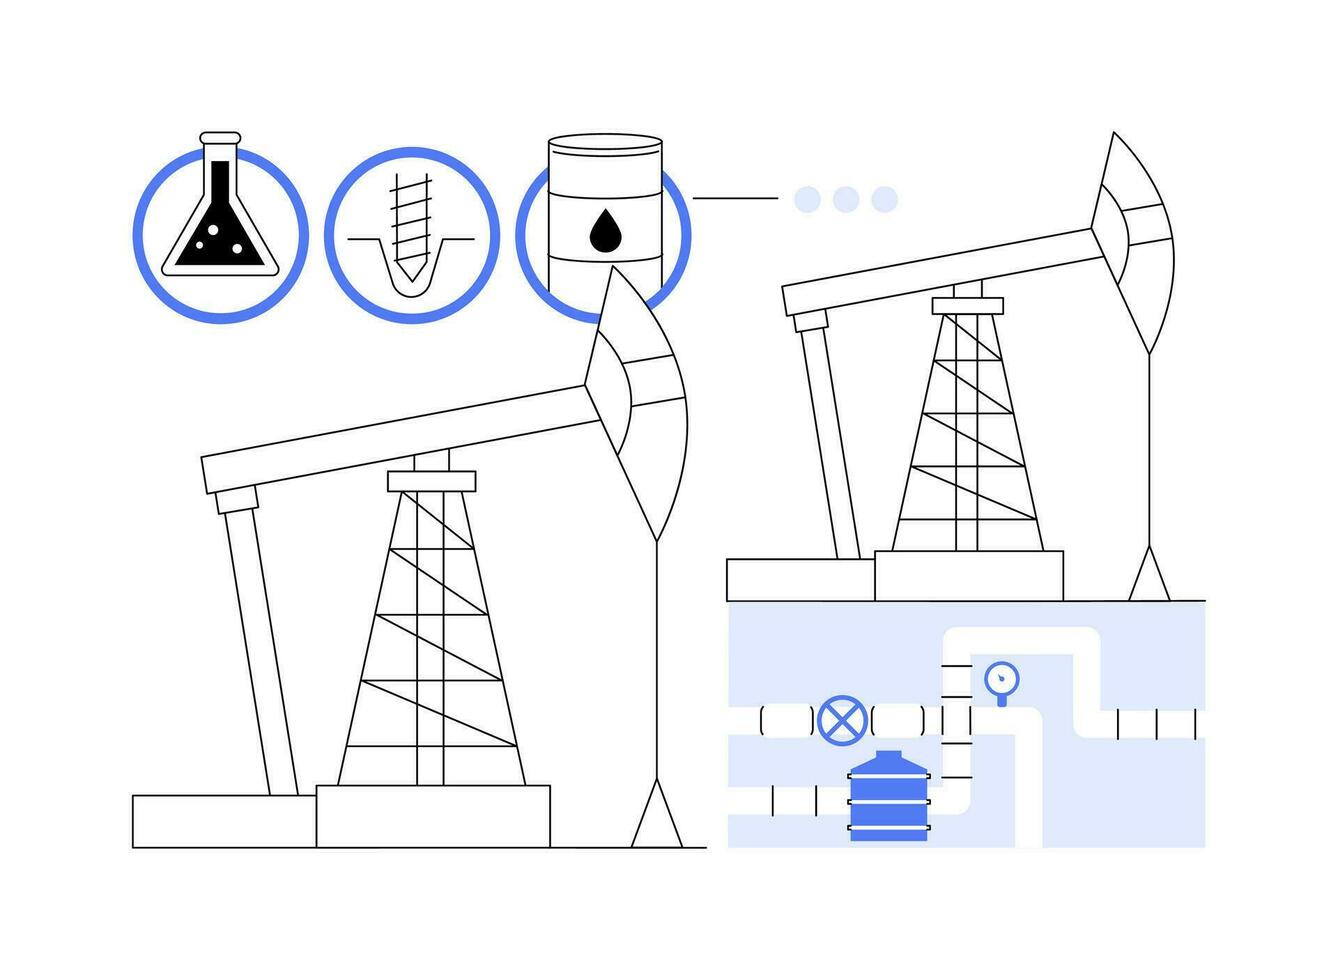 Oil rig abstract concept vector illustration.